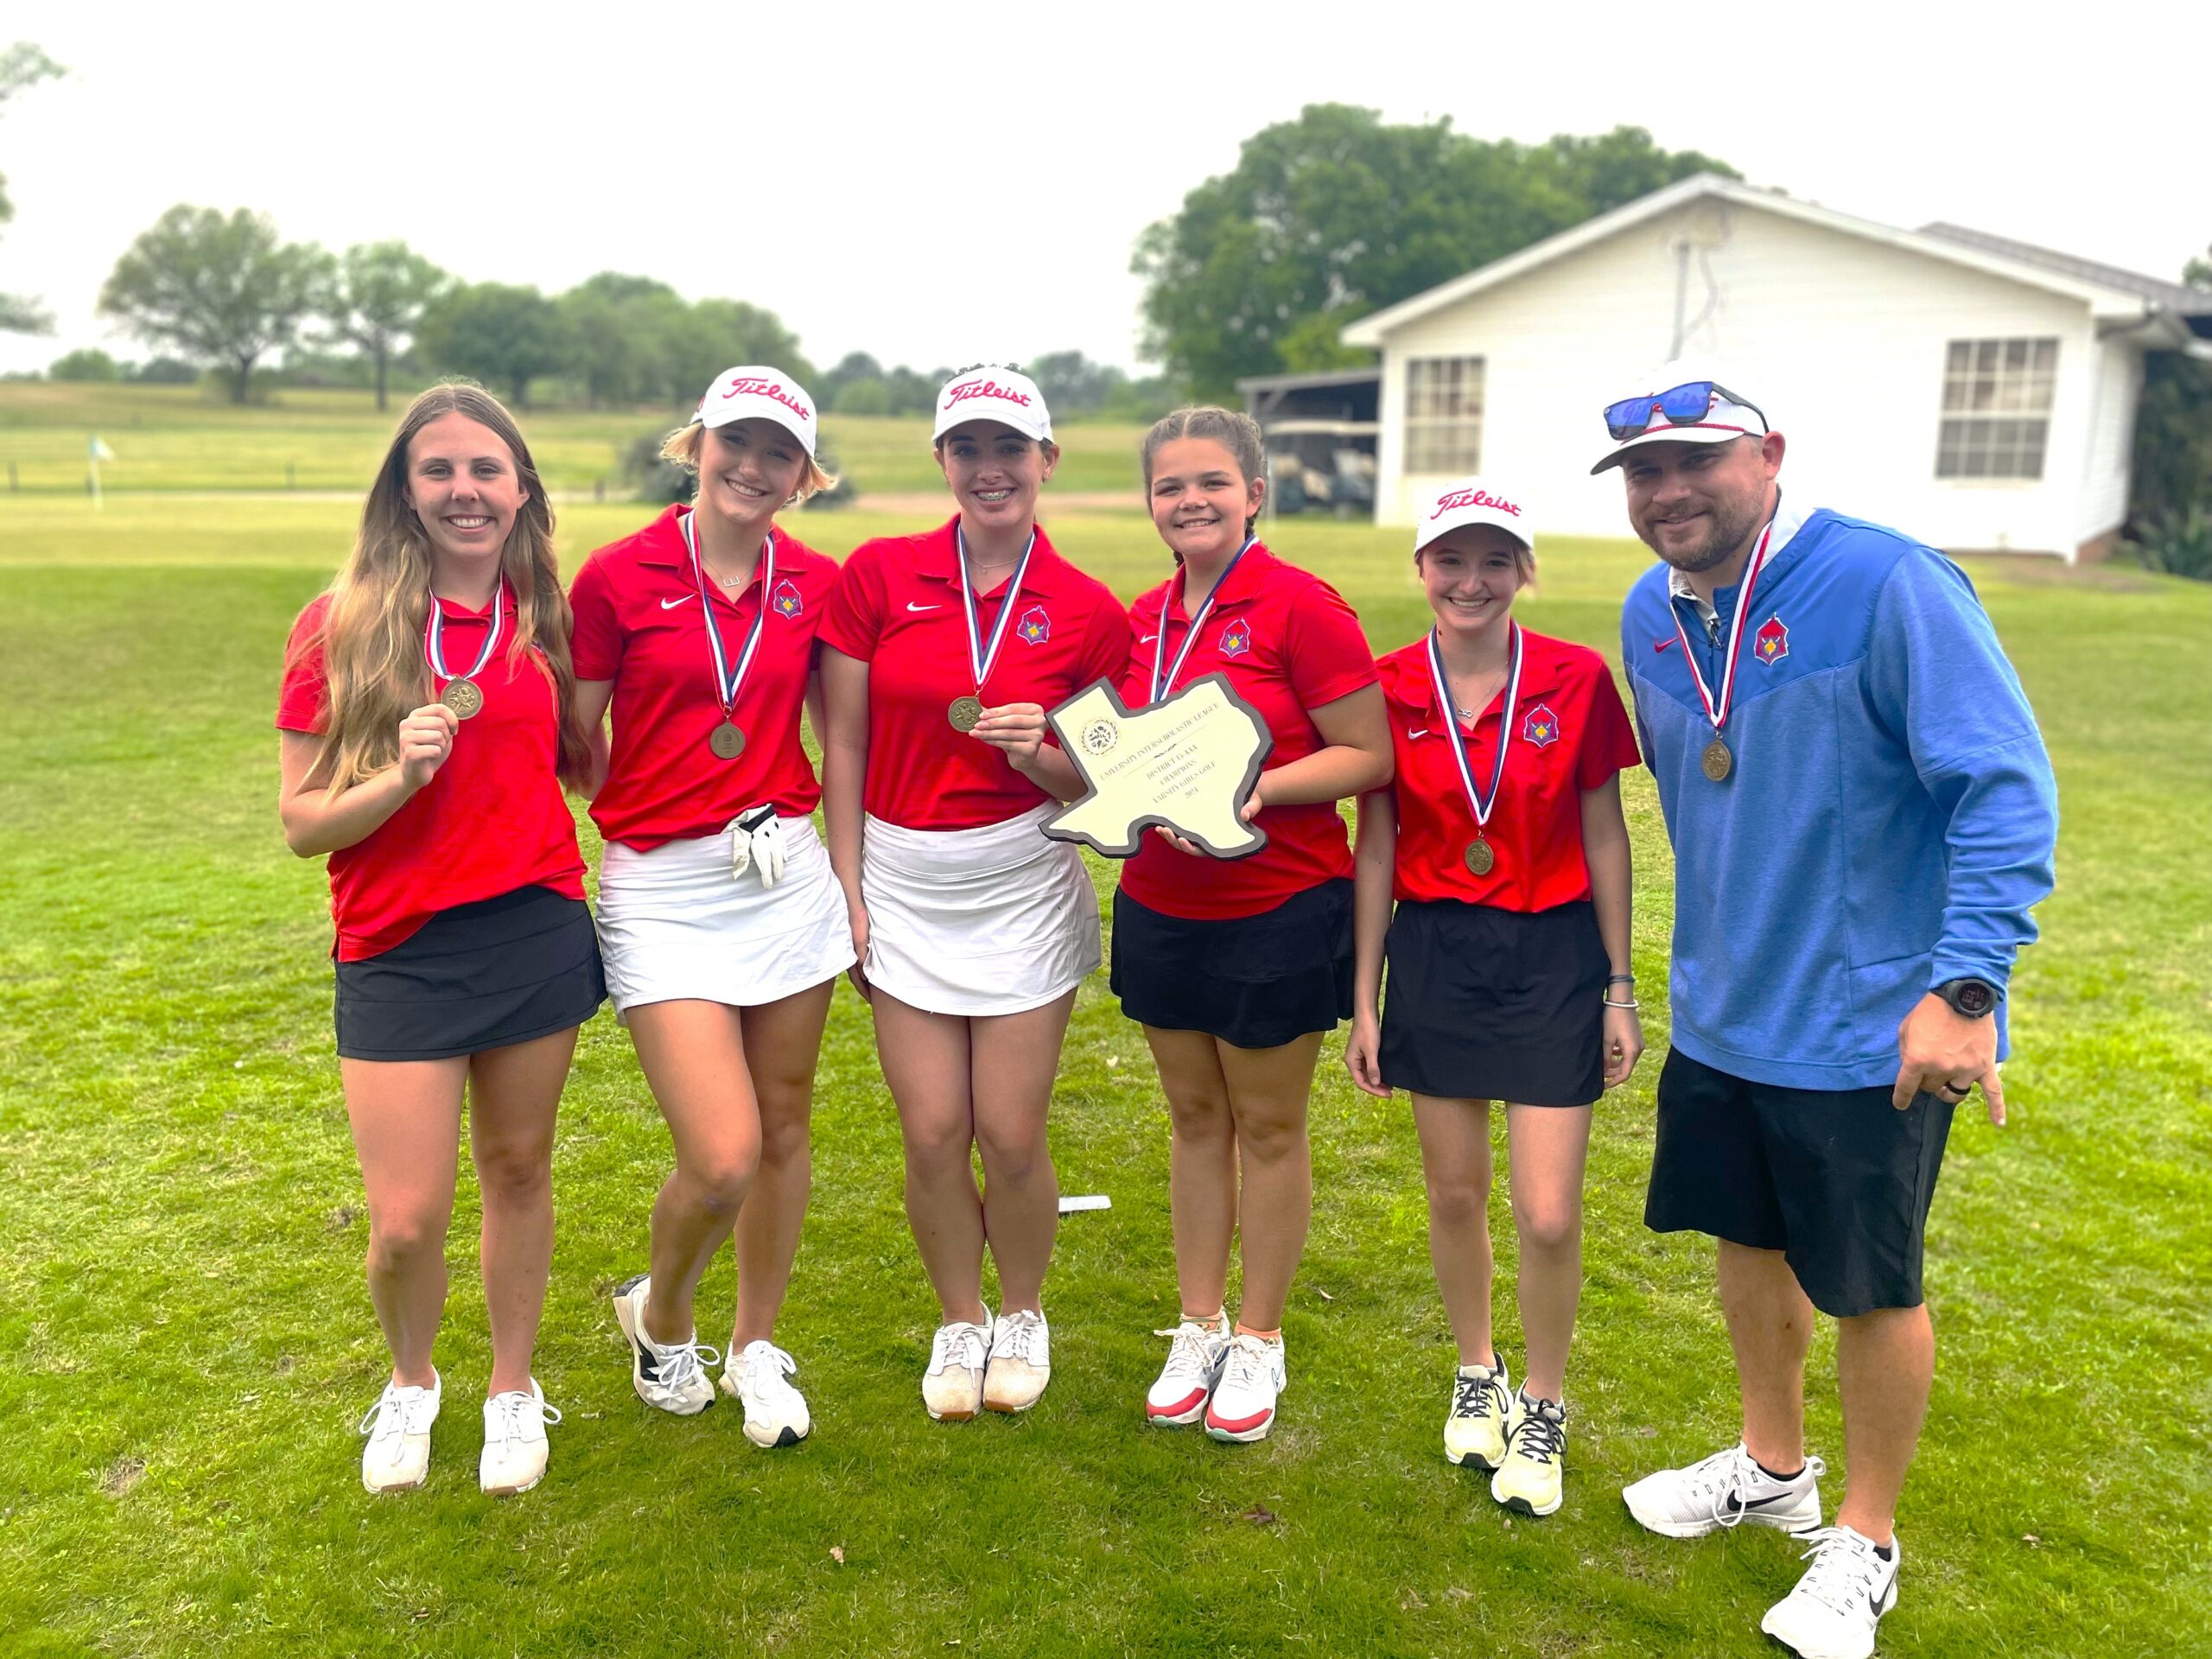 Sabine's girls golfers (from left) Lillian Odle, Emily McBride, Dakota Wick, Allyssa Crutcher and Avery Rutland (with coach Phillip Anderson) will play at Oak Hurst Golf Club in Bullard this week for a chance to qualify for the UIL Class 3A State Golf Tournament in May, as will Sabine boys golfer Garridon Edwards (below). Overton's boys and girls teams (pictured below) are also competing in regionals this week at Cherokee Ranch in Jacksonville for opportunities to play in the UIL 2A state tournament. (Photos courtesy of SABINE HIGH SCHOOL GOLF and OVERTON HIGH SCHOOL / OVERTON MUSTANG ATHLETICS FACEBOOK)